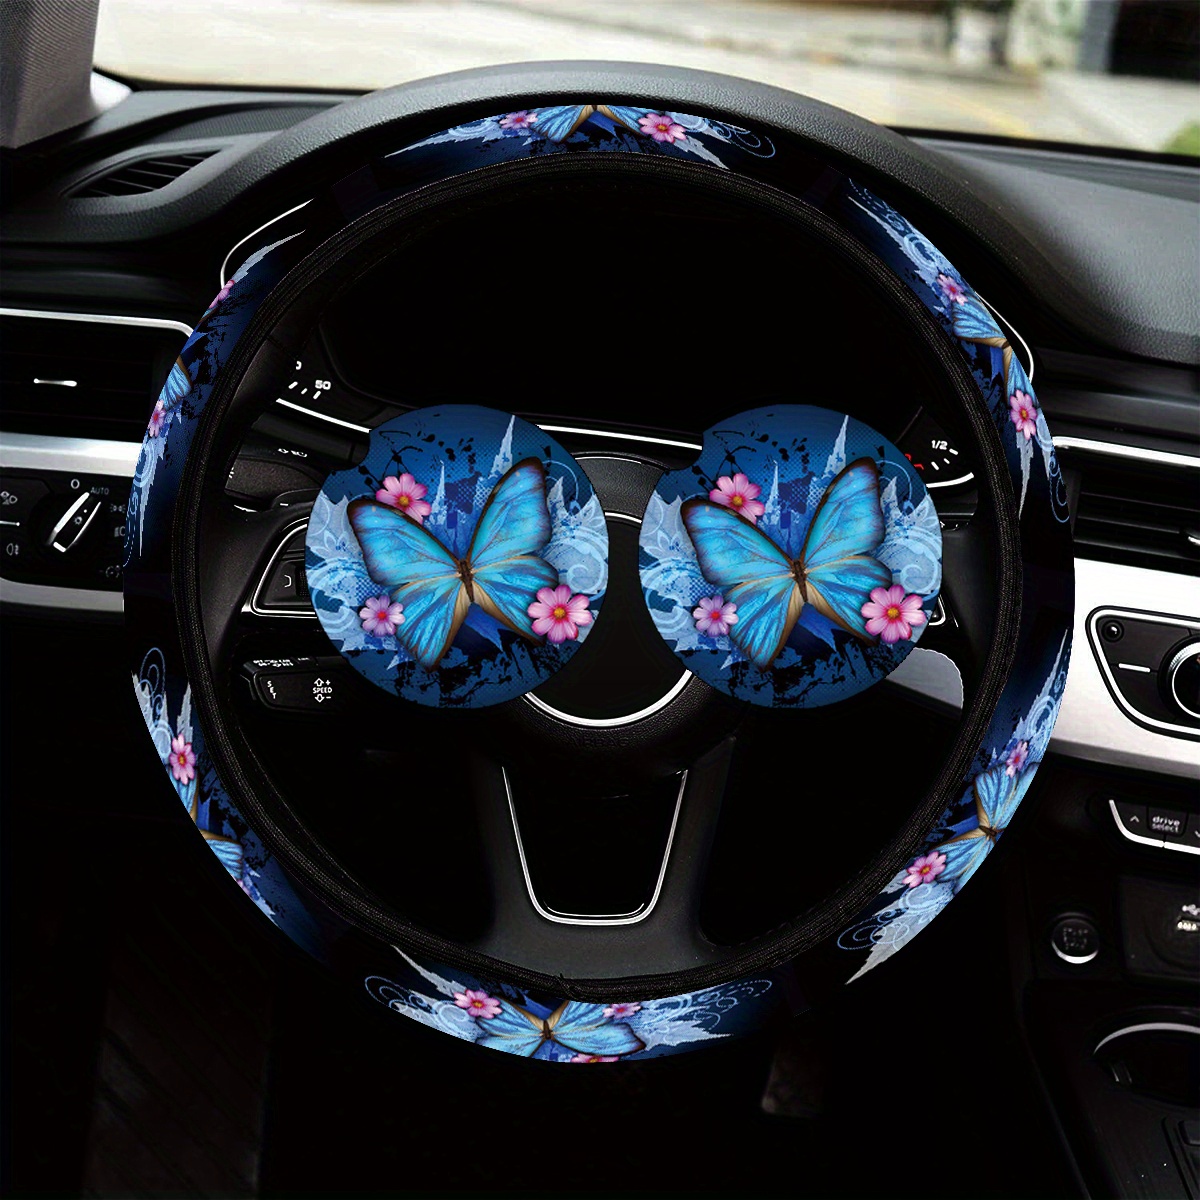 2PCS Cute Floral Ceramic Car Cup Holder Coaster - Groovy Retro Aesthetic -  Adorable Car Cup Holder Accessories with Floral Design - Coaster Mat for